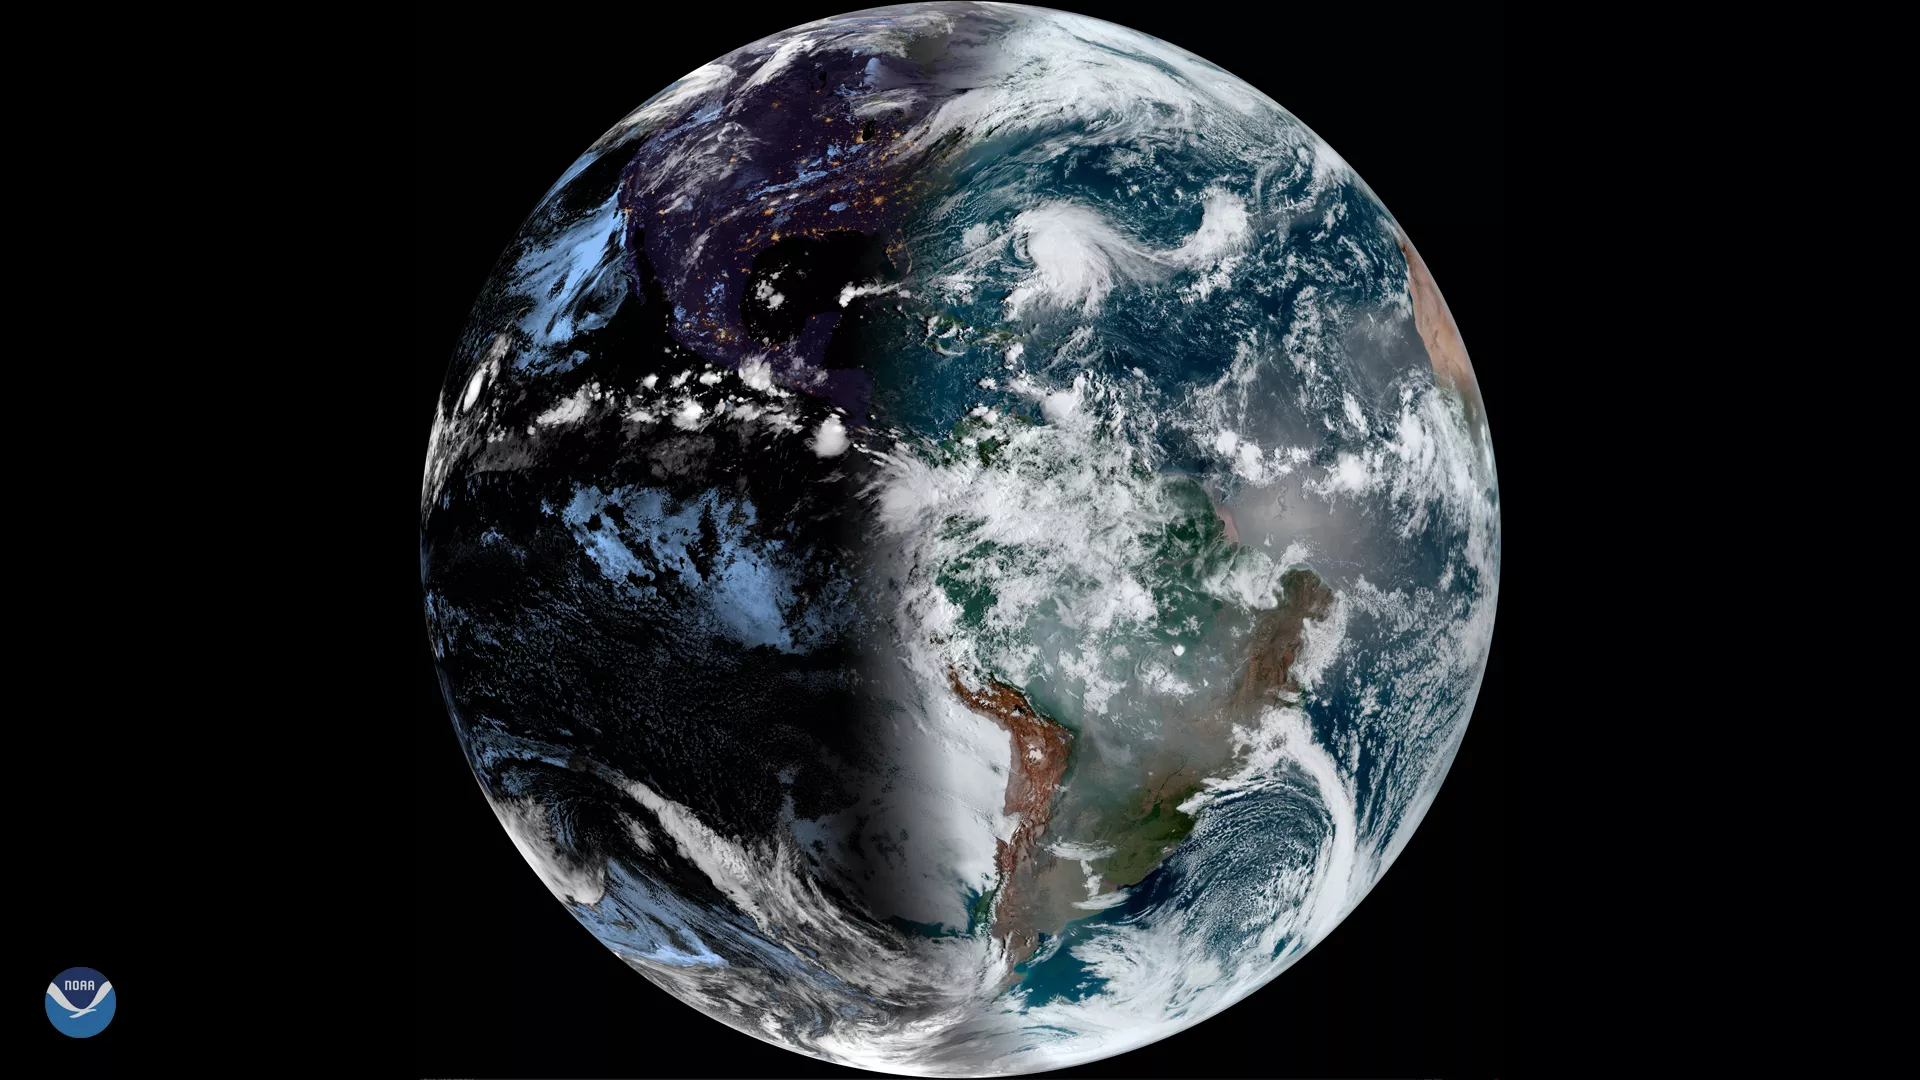 Satellite imagery from GOES East shows the autumnal equinox in the Northern Hemisphere